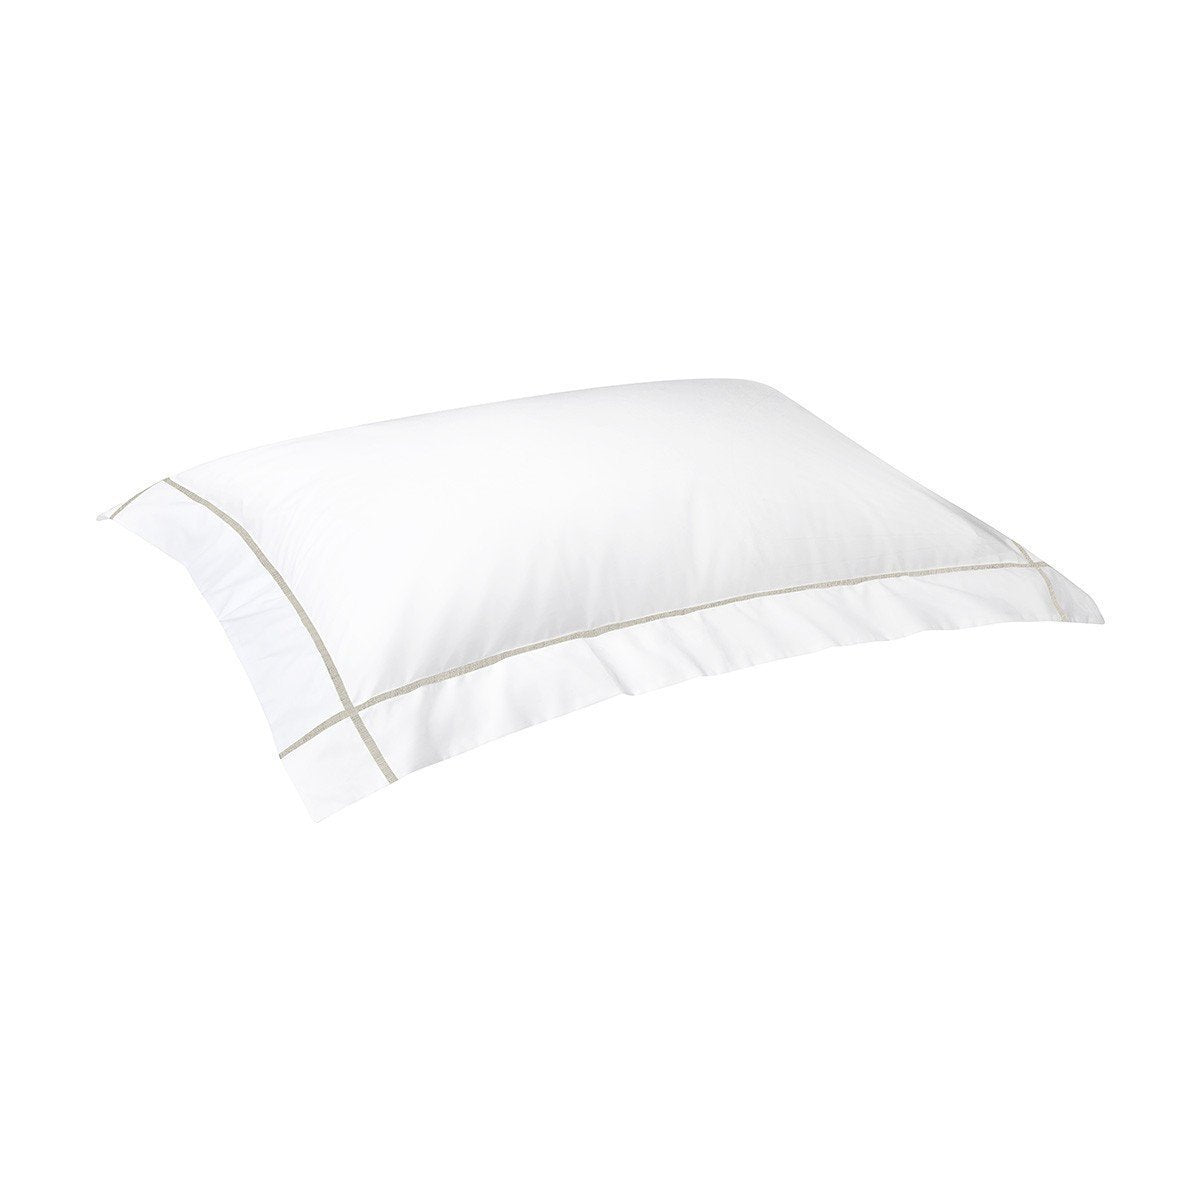 Athena Nacre Bedding Collection by Yves Delorme | Fig Linens - White and ivory standard sham